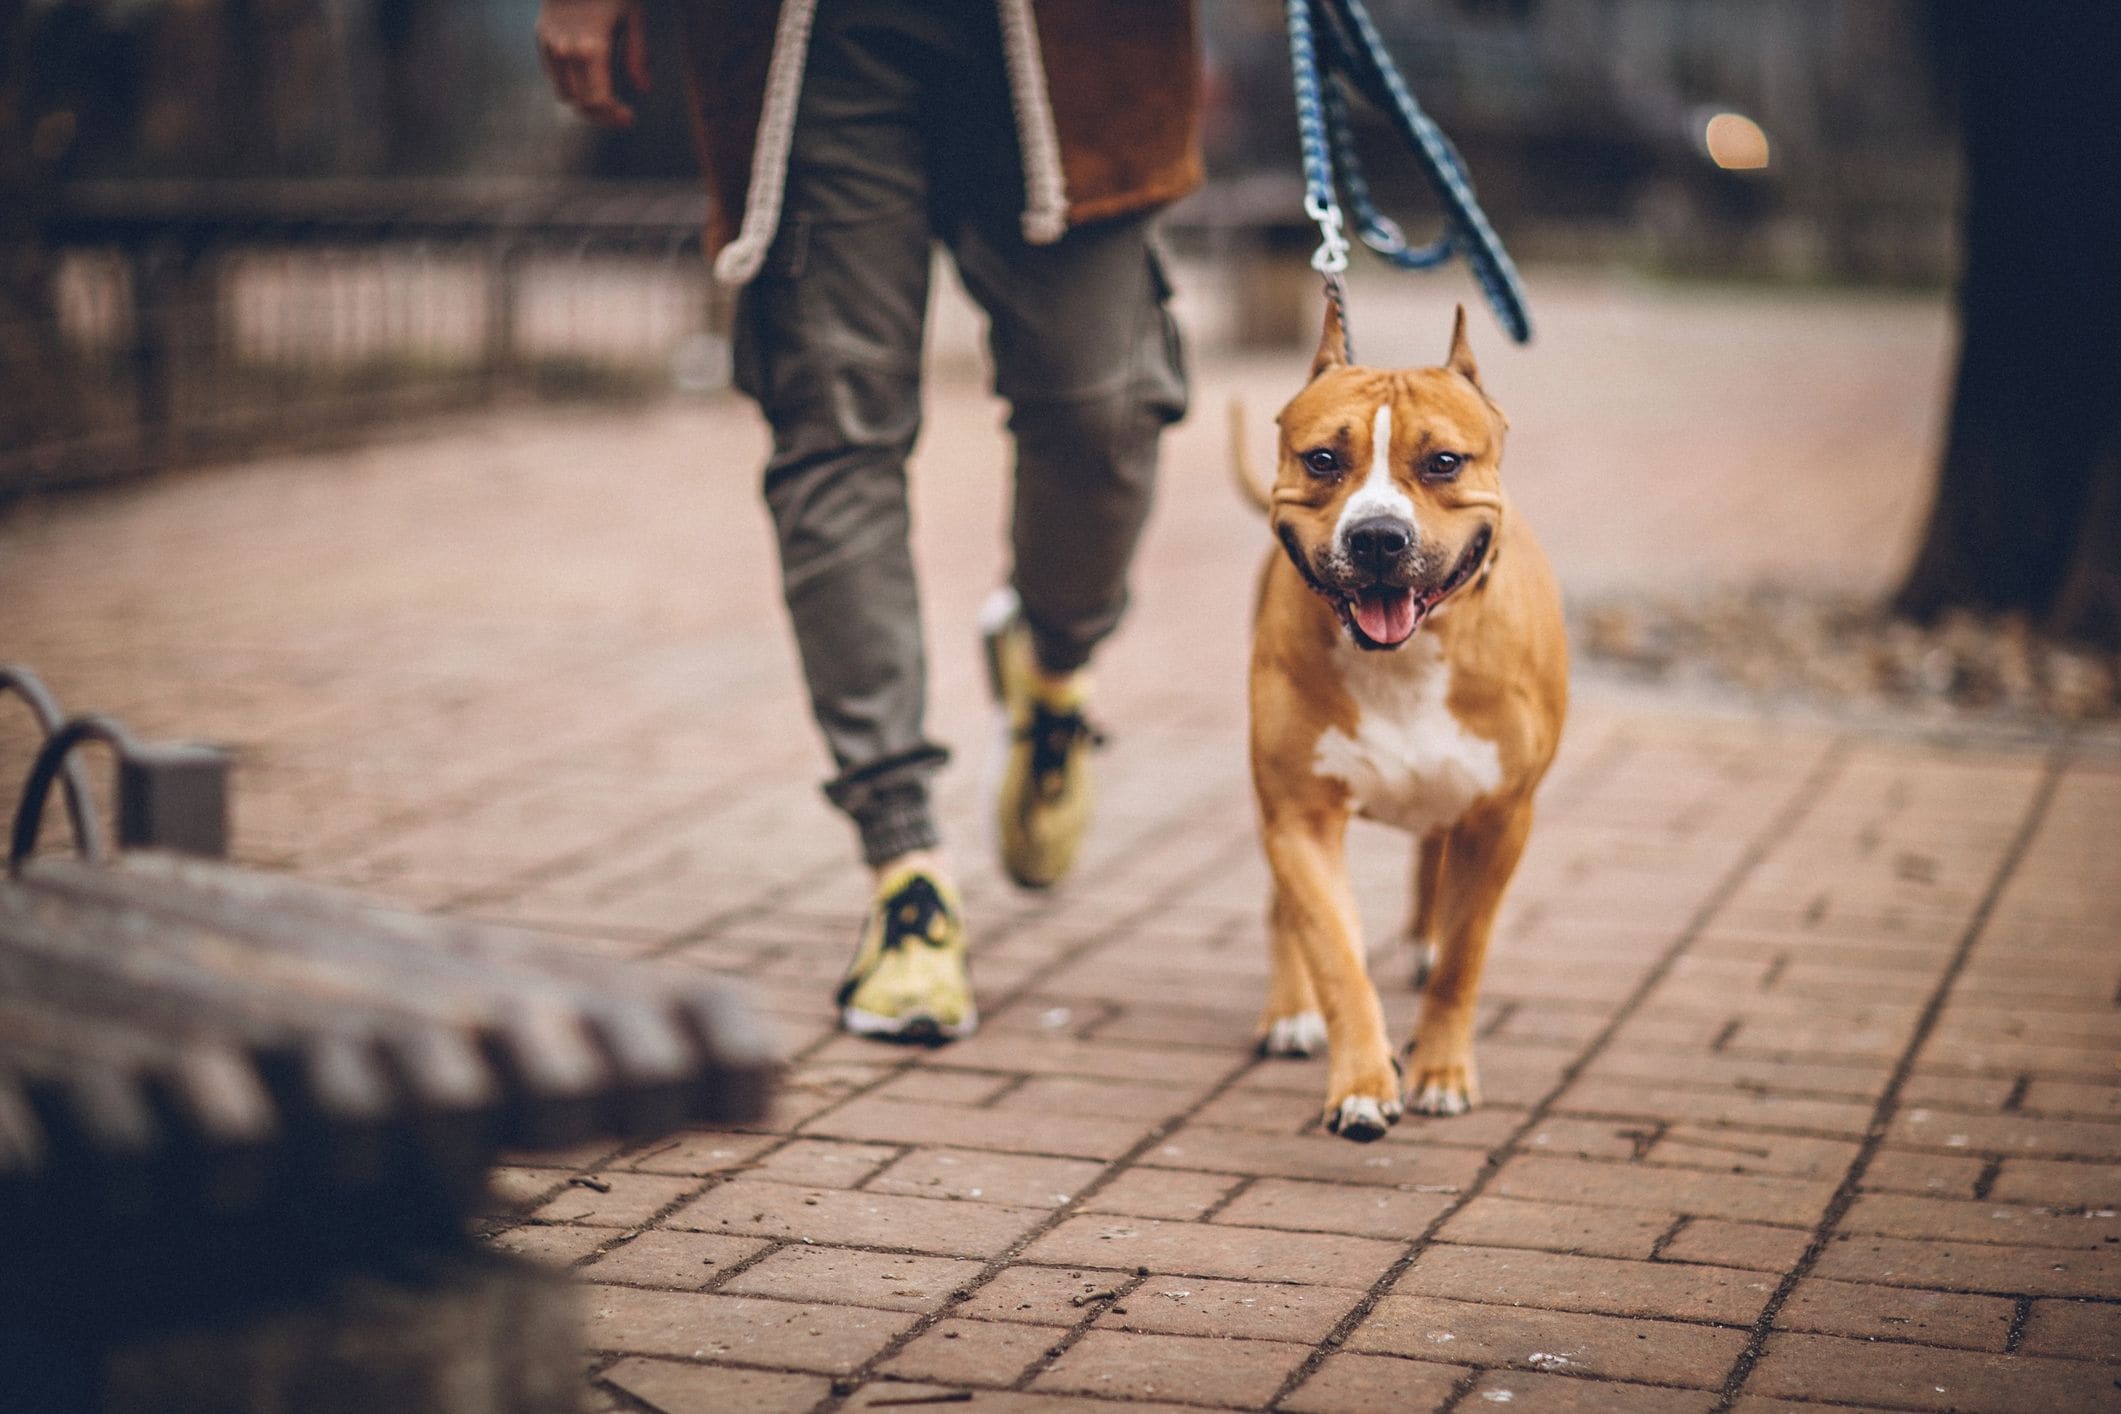 Pet boarding vs. pet sitting: Which is right for your dog?